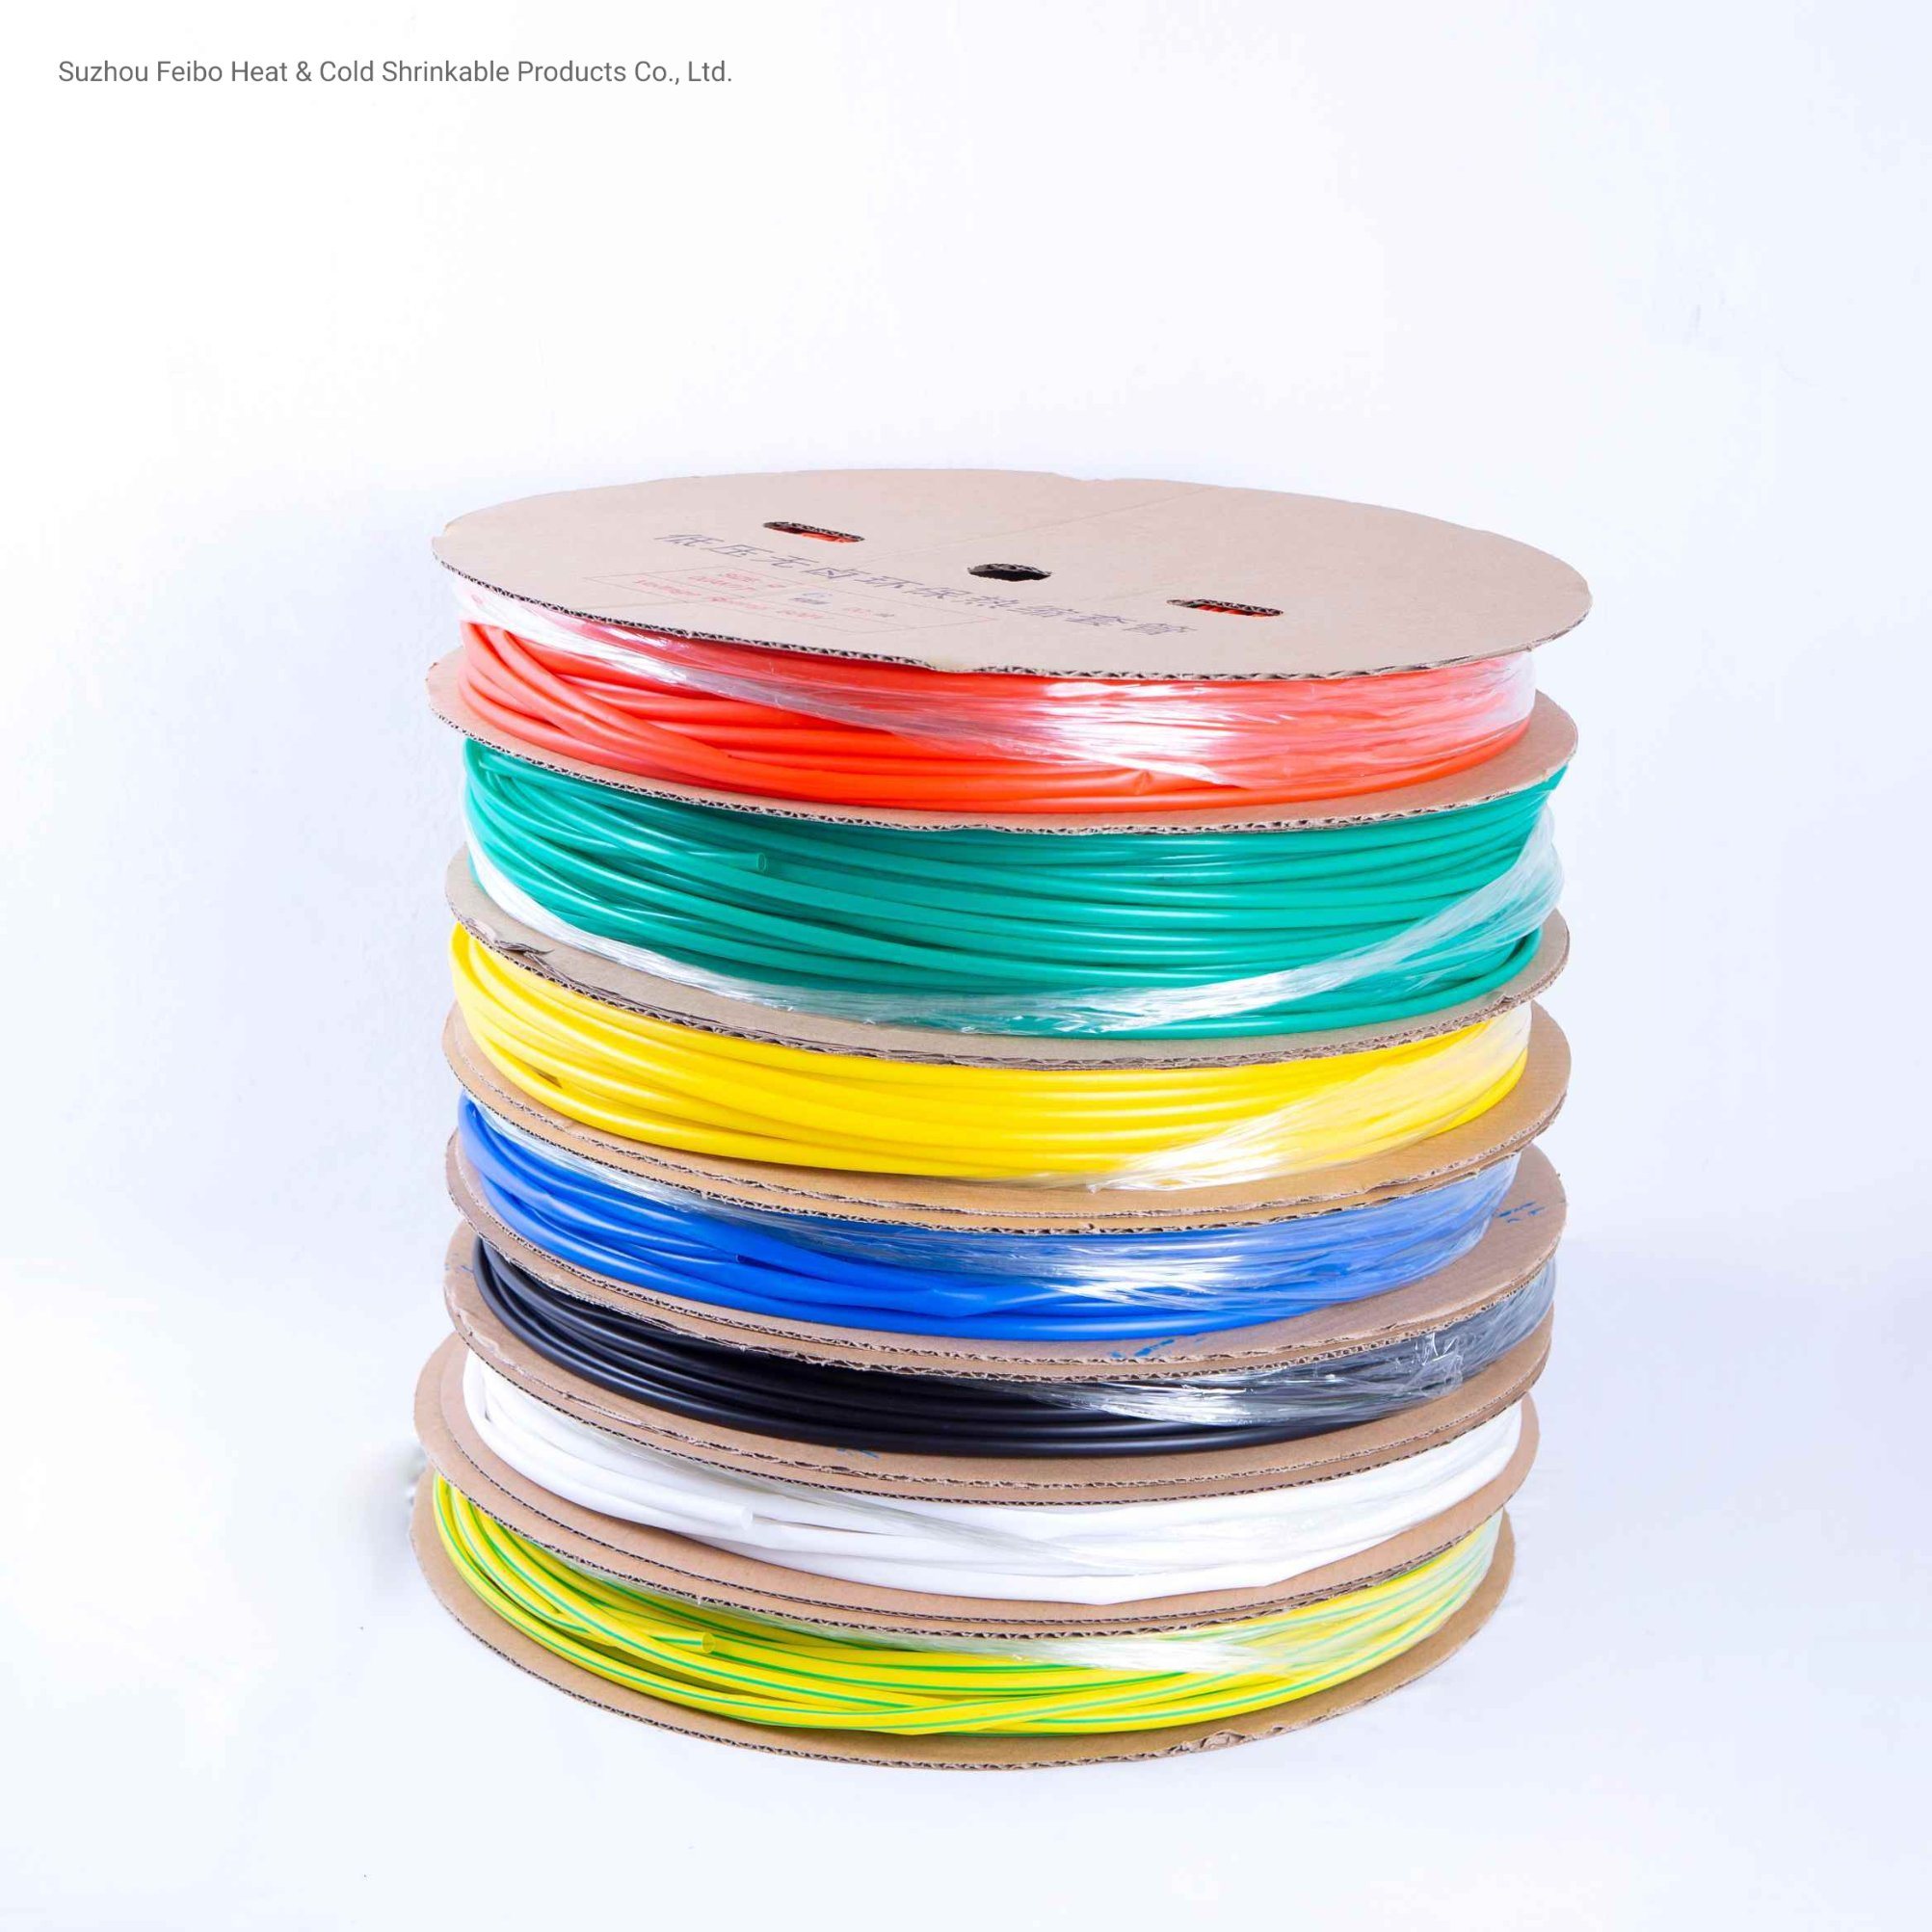 Szfb Factory Directly Sale Colorful Shrink Tube Heat Shrink Tubing